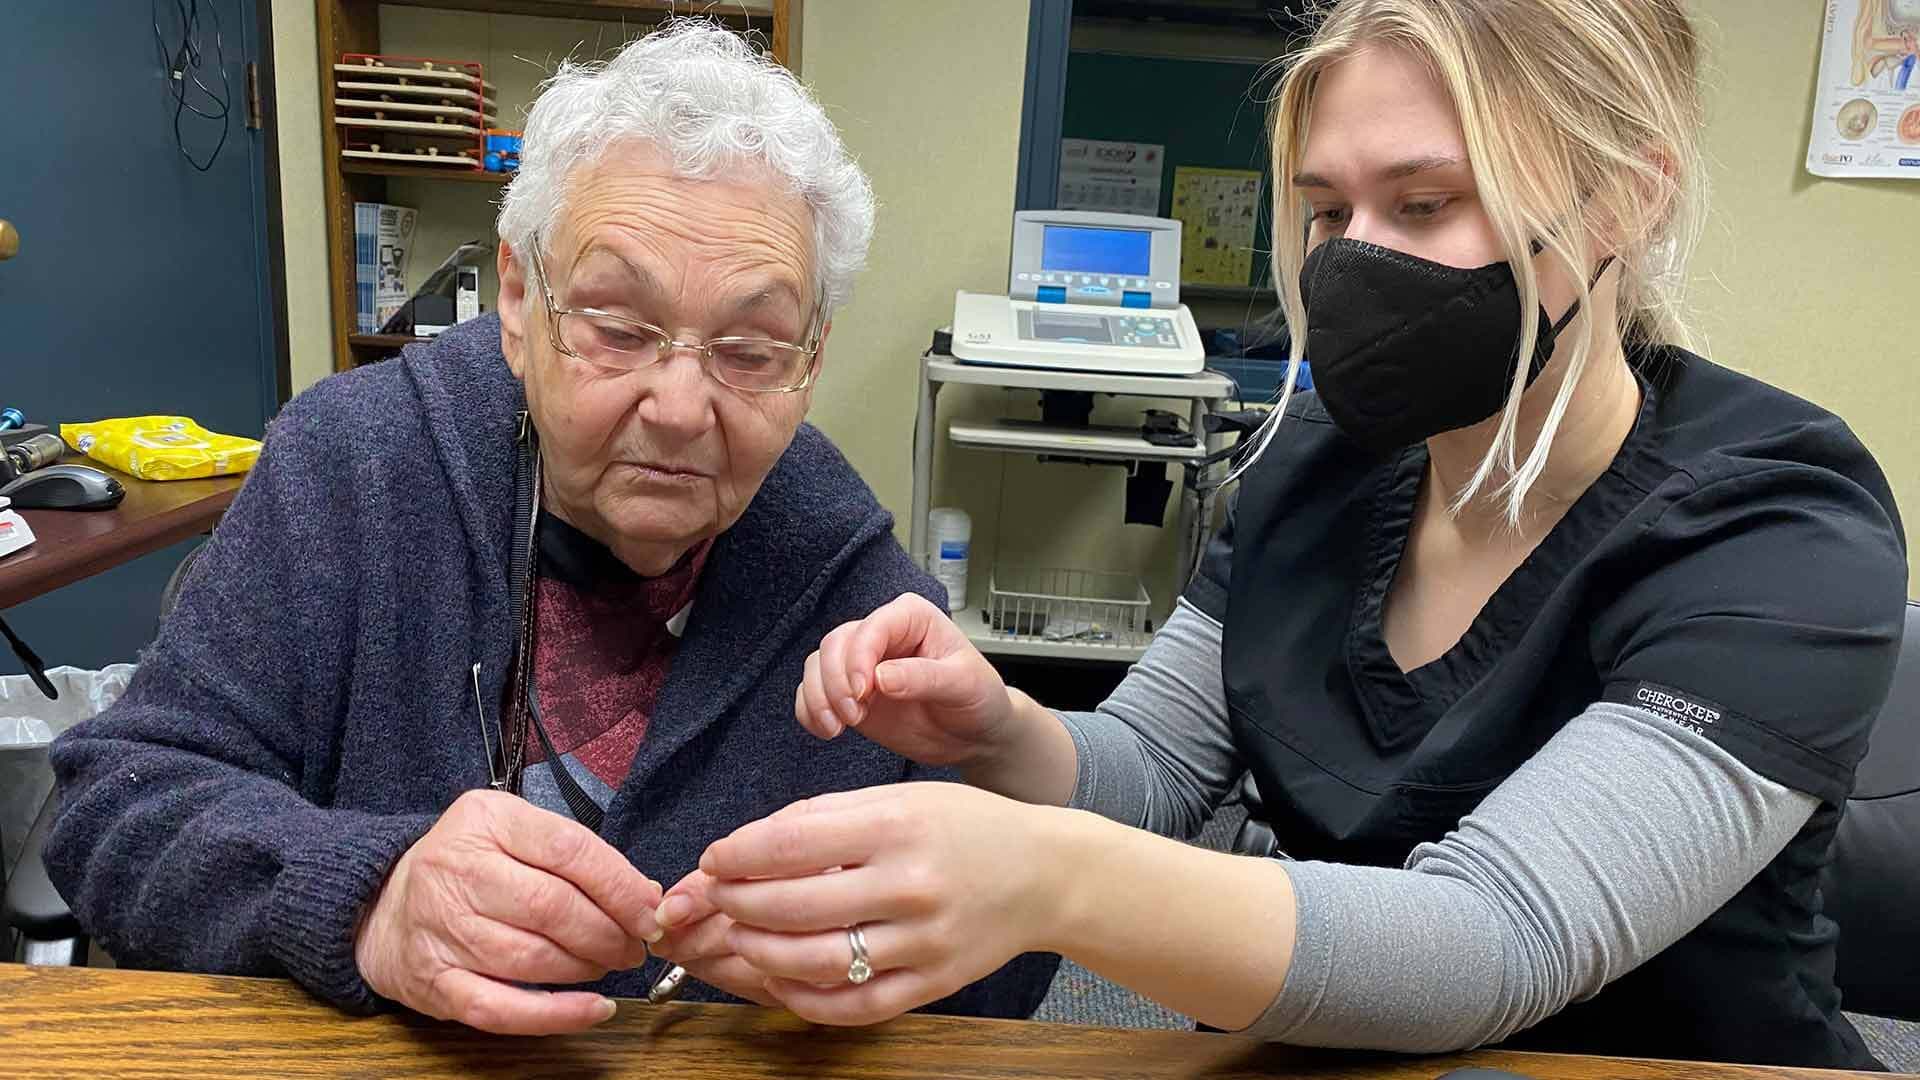 Woman gets fitted with hearing aid